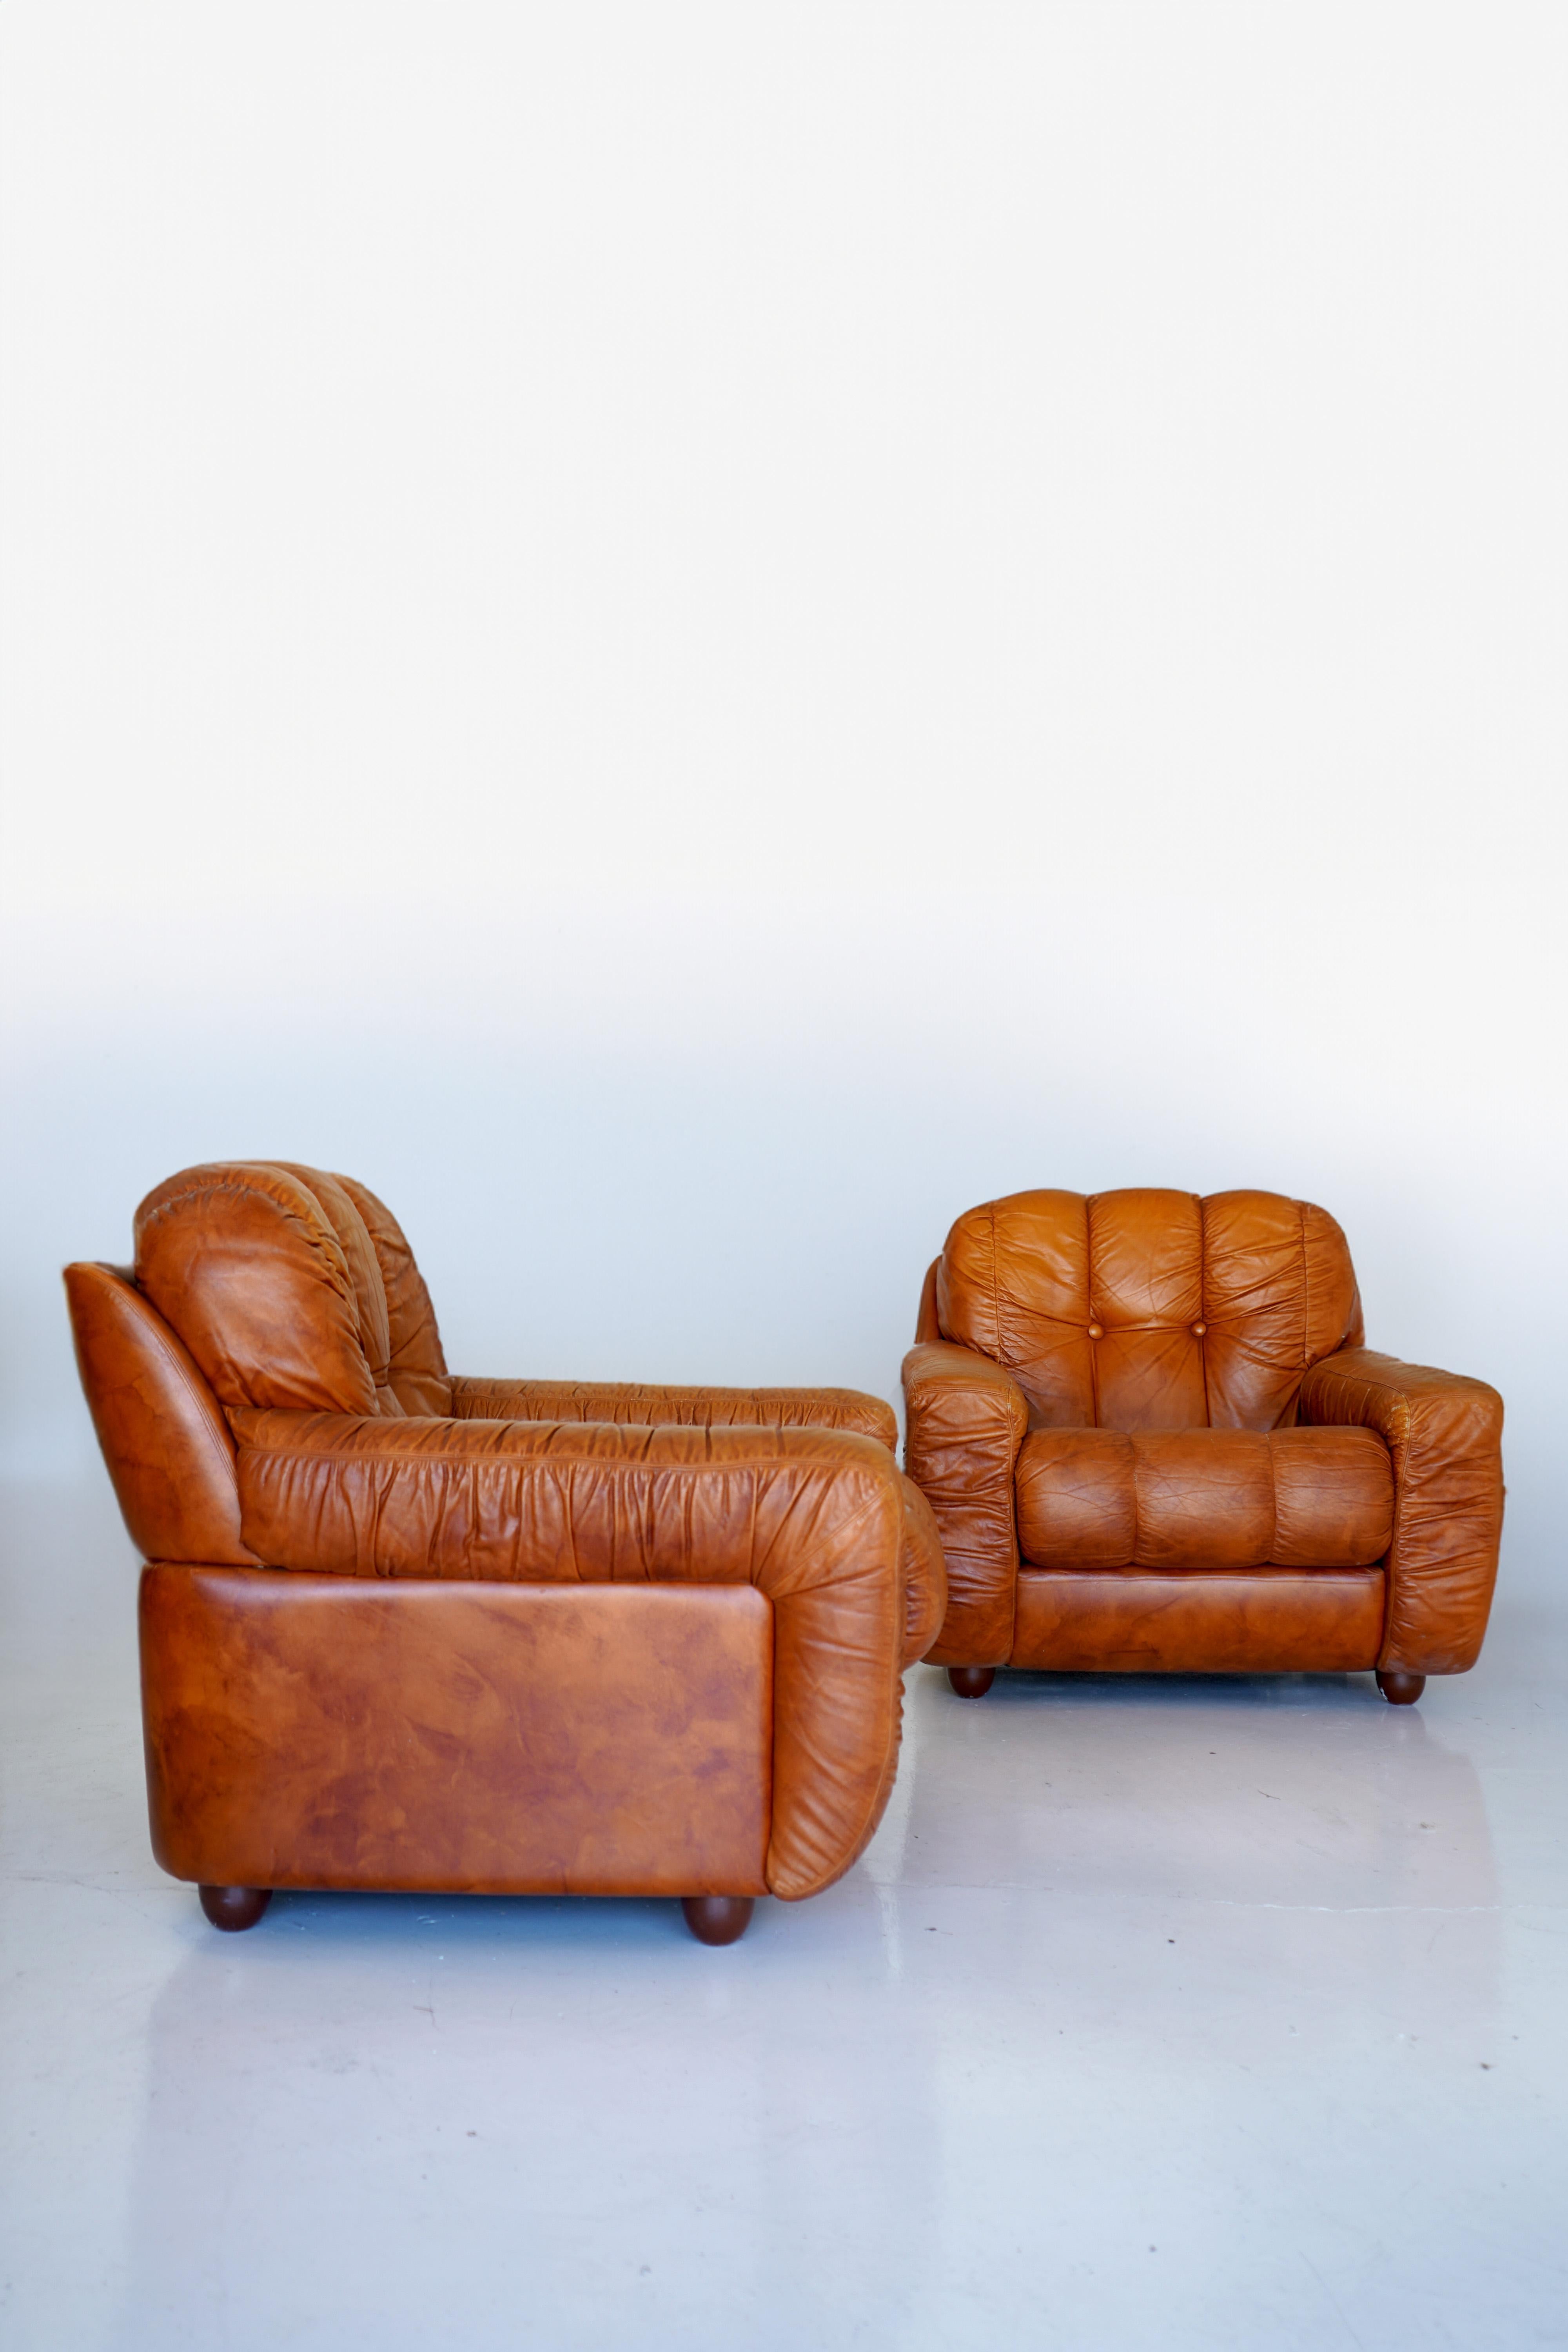 Classic 70s vibes on these channeled Italian leather armchairs with vinyl frame in the style of De Sede. Matching sofa also available.

Wear and slight losses to upper edge of backside but otherwise in good condition.